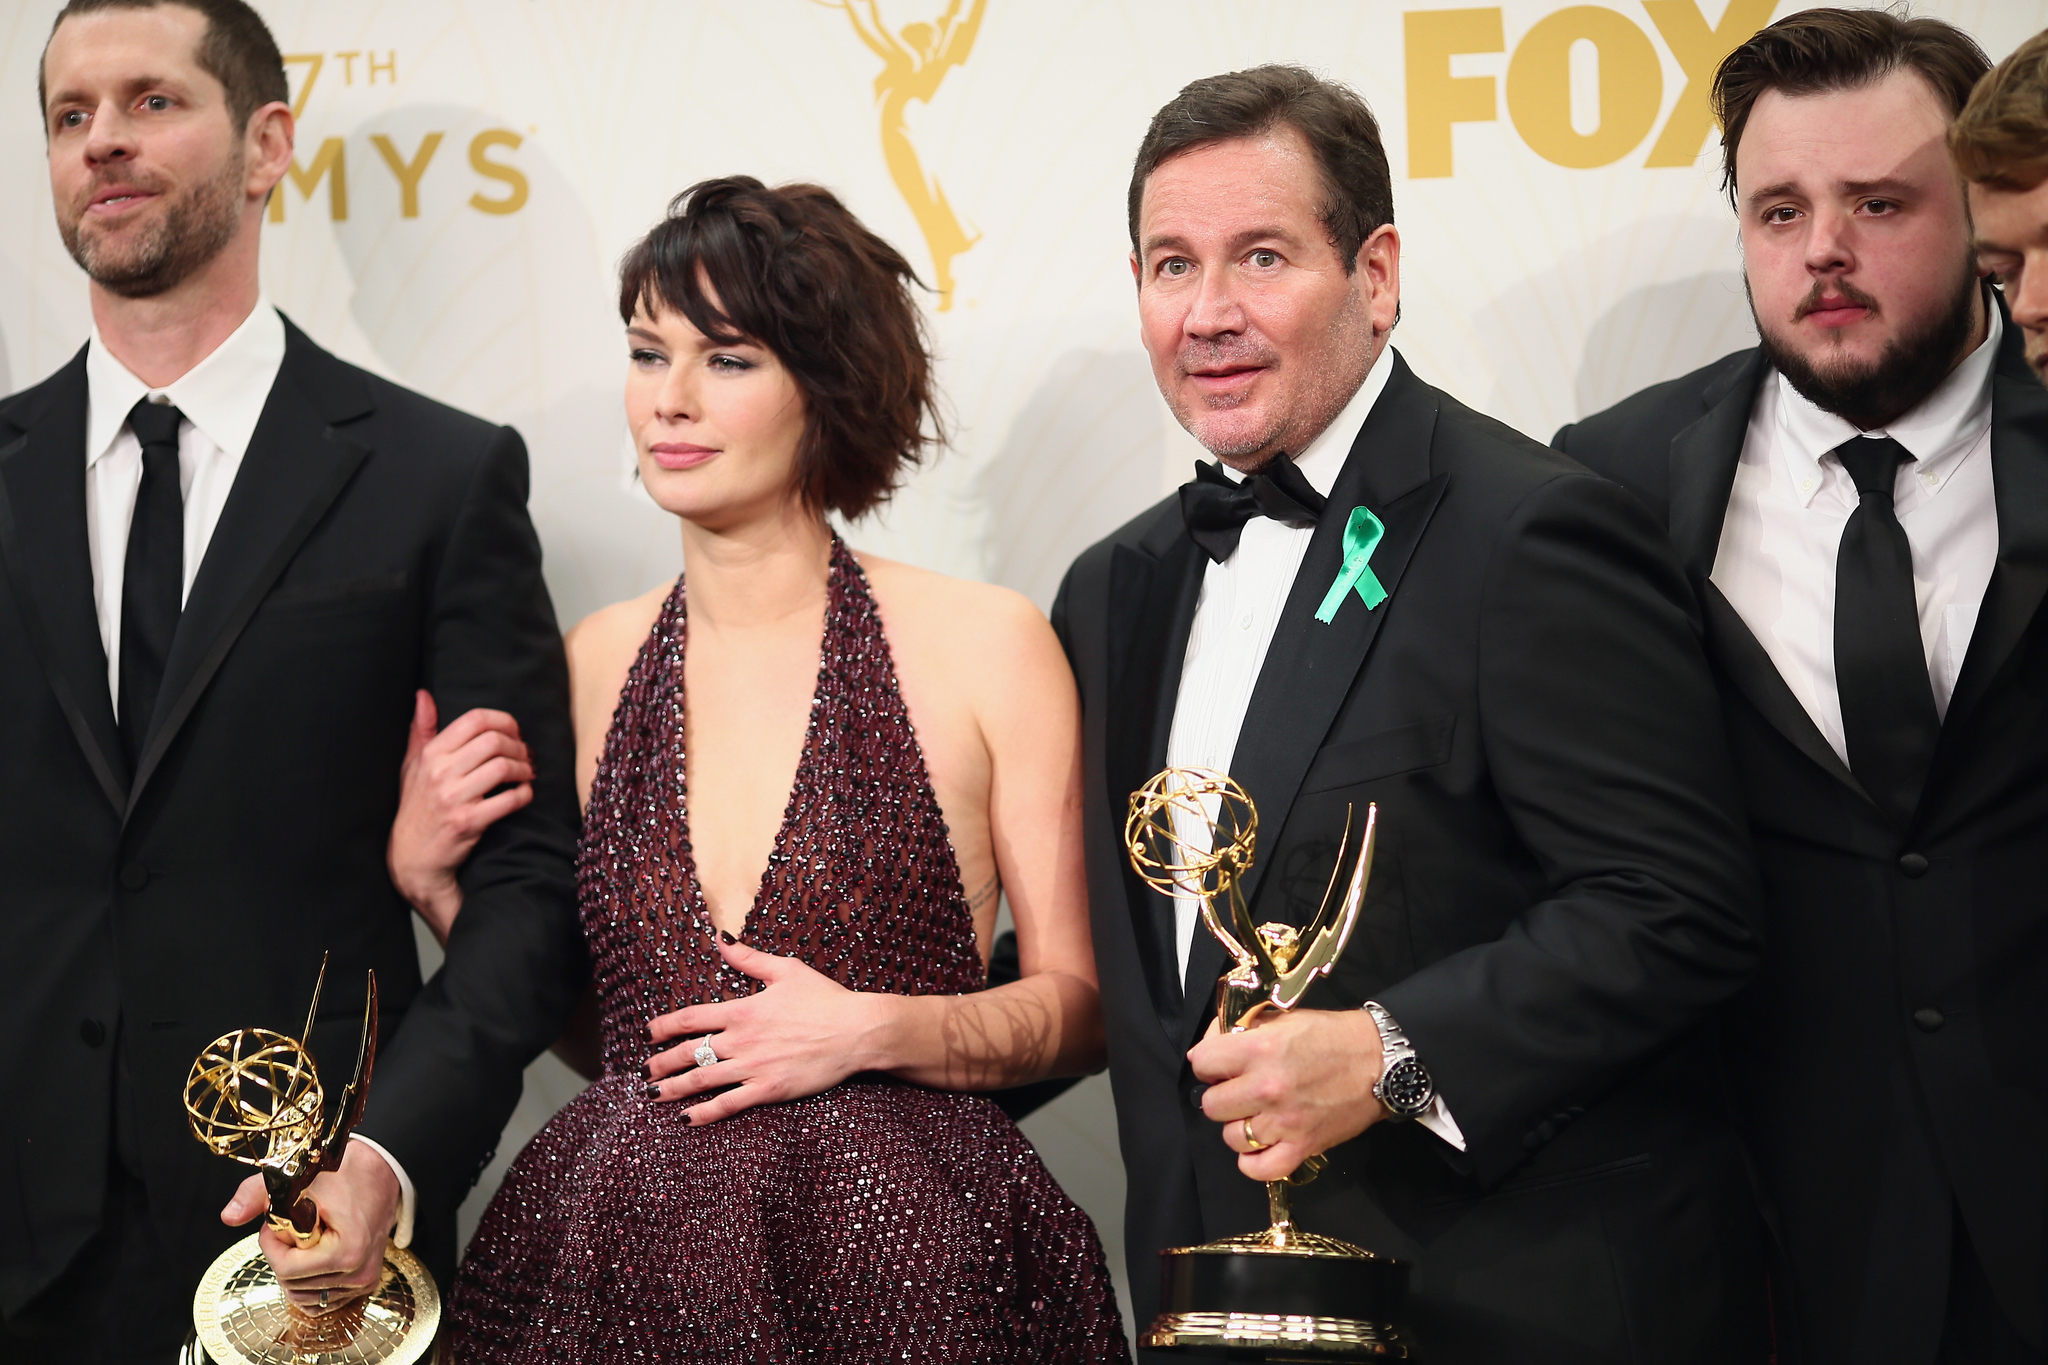 Lena Headey, David Nutter, D.B. Weiss and John Bradley at event of The 67th Primetime Emmy Awards (2015)